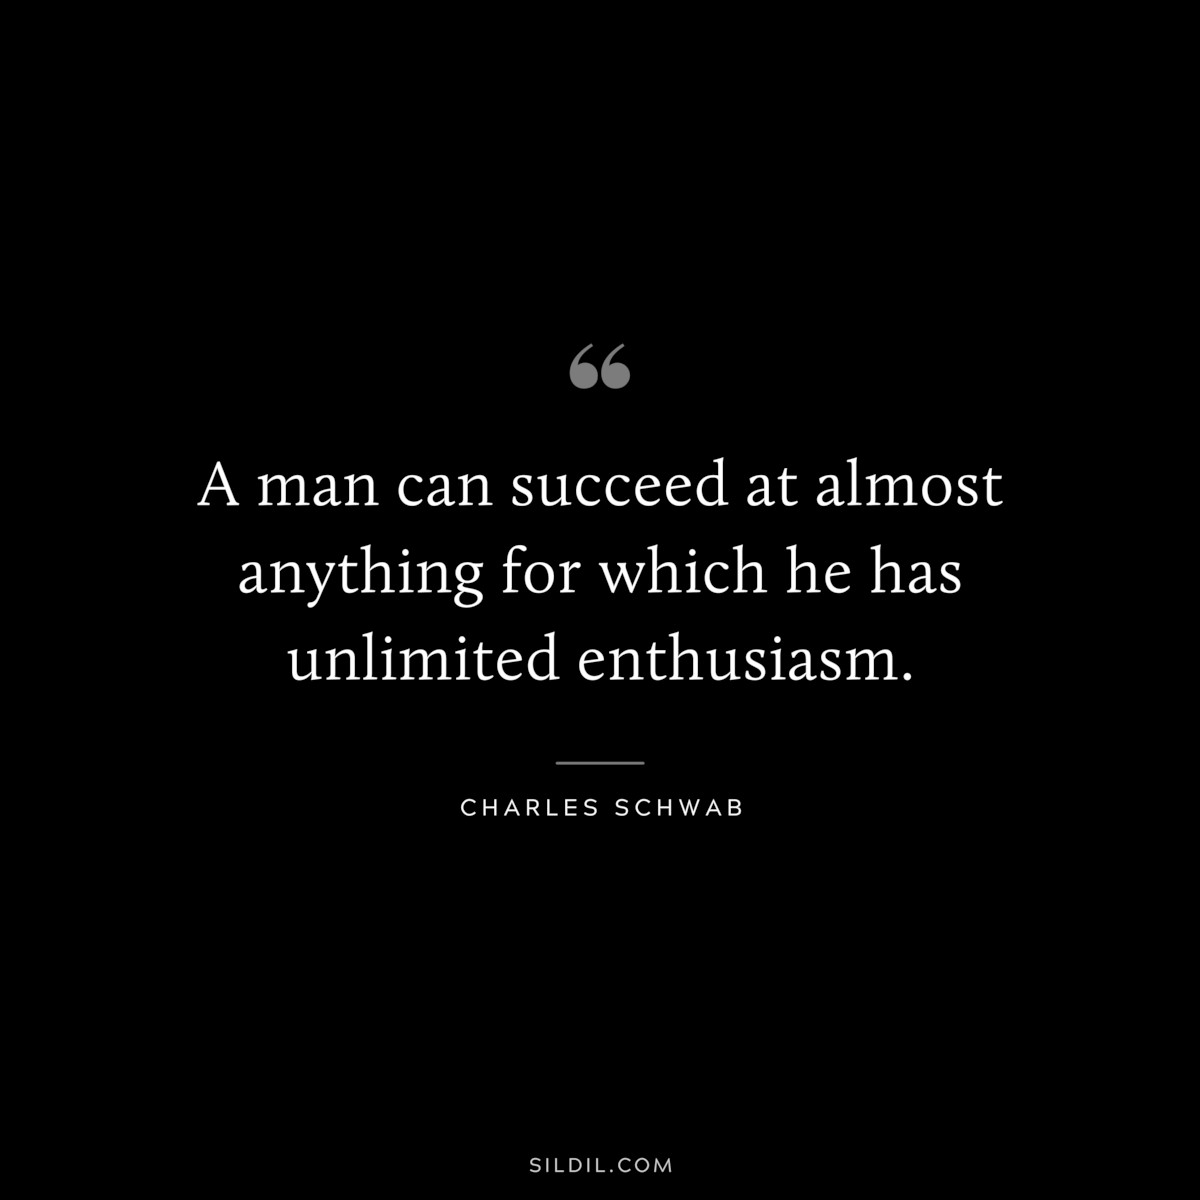 A man can succeed at almost anything for which he has unlimited enthusiasm. ― Charles Schwab